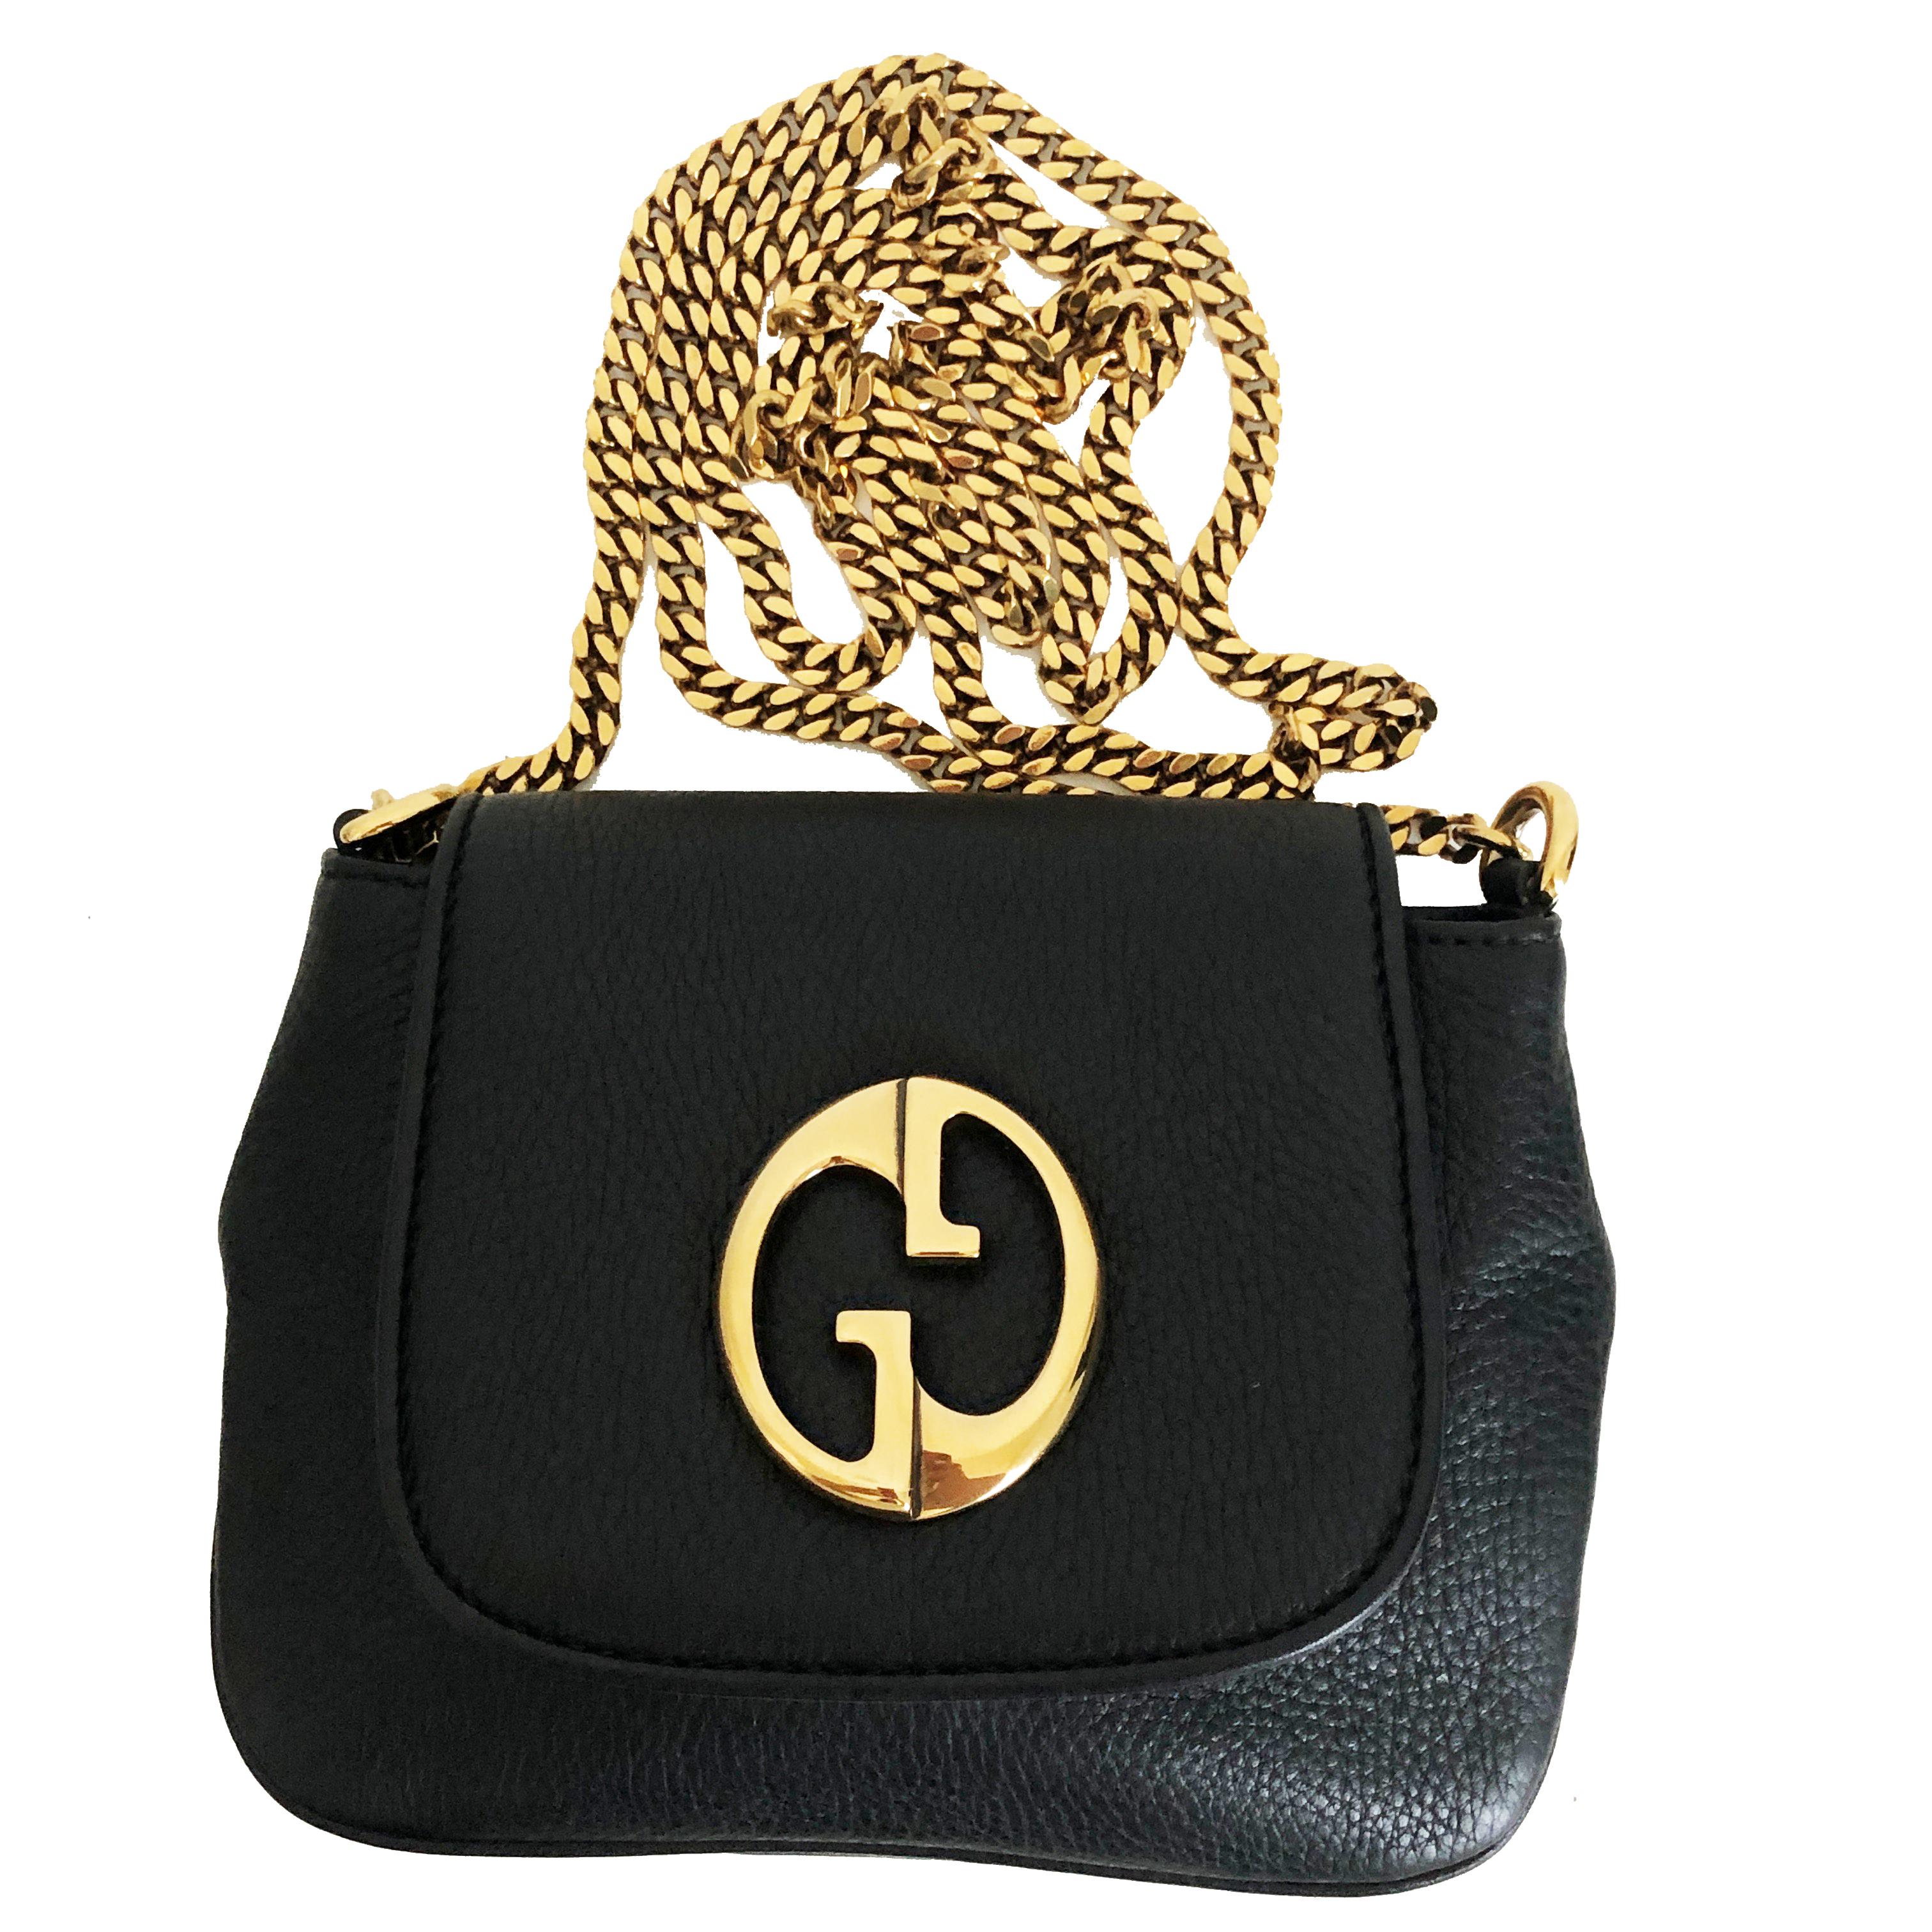 Authentic, NWOT Gucci 1973 Shoulder Bag Cross Body, made from black pebbled leather and released in 2012. Comes with copy of receipt and dust bag. Interior lined in sueded fabric with one slip pocket. Authenticated by ENTRUPY, and we'll include a